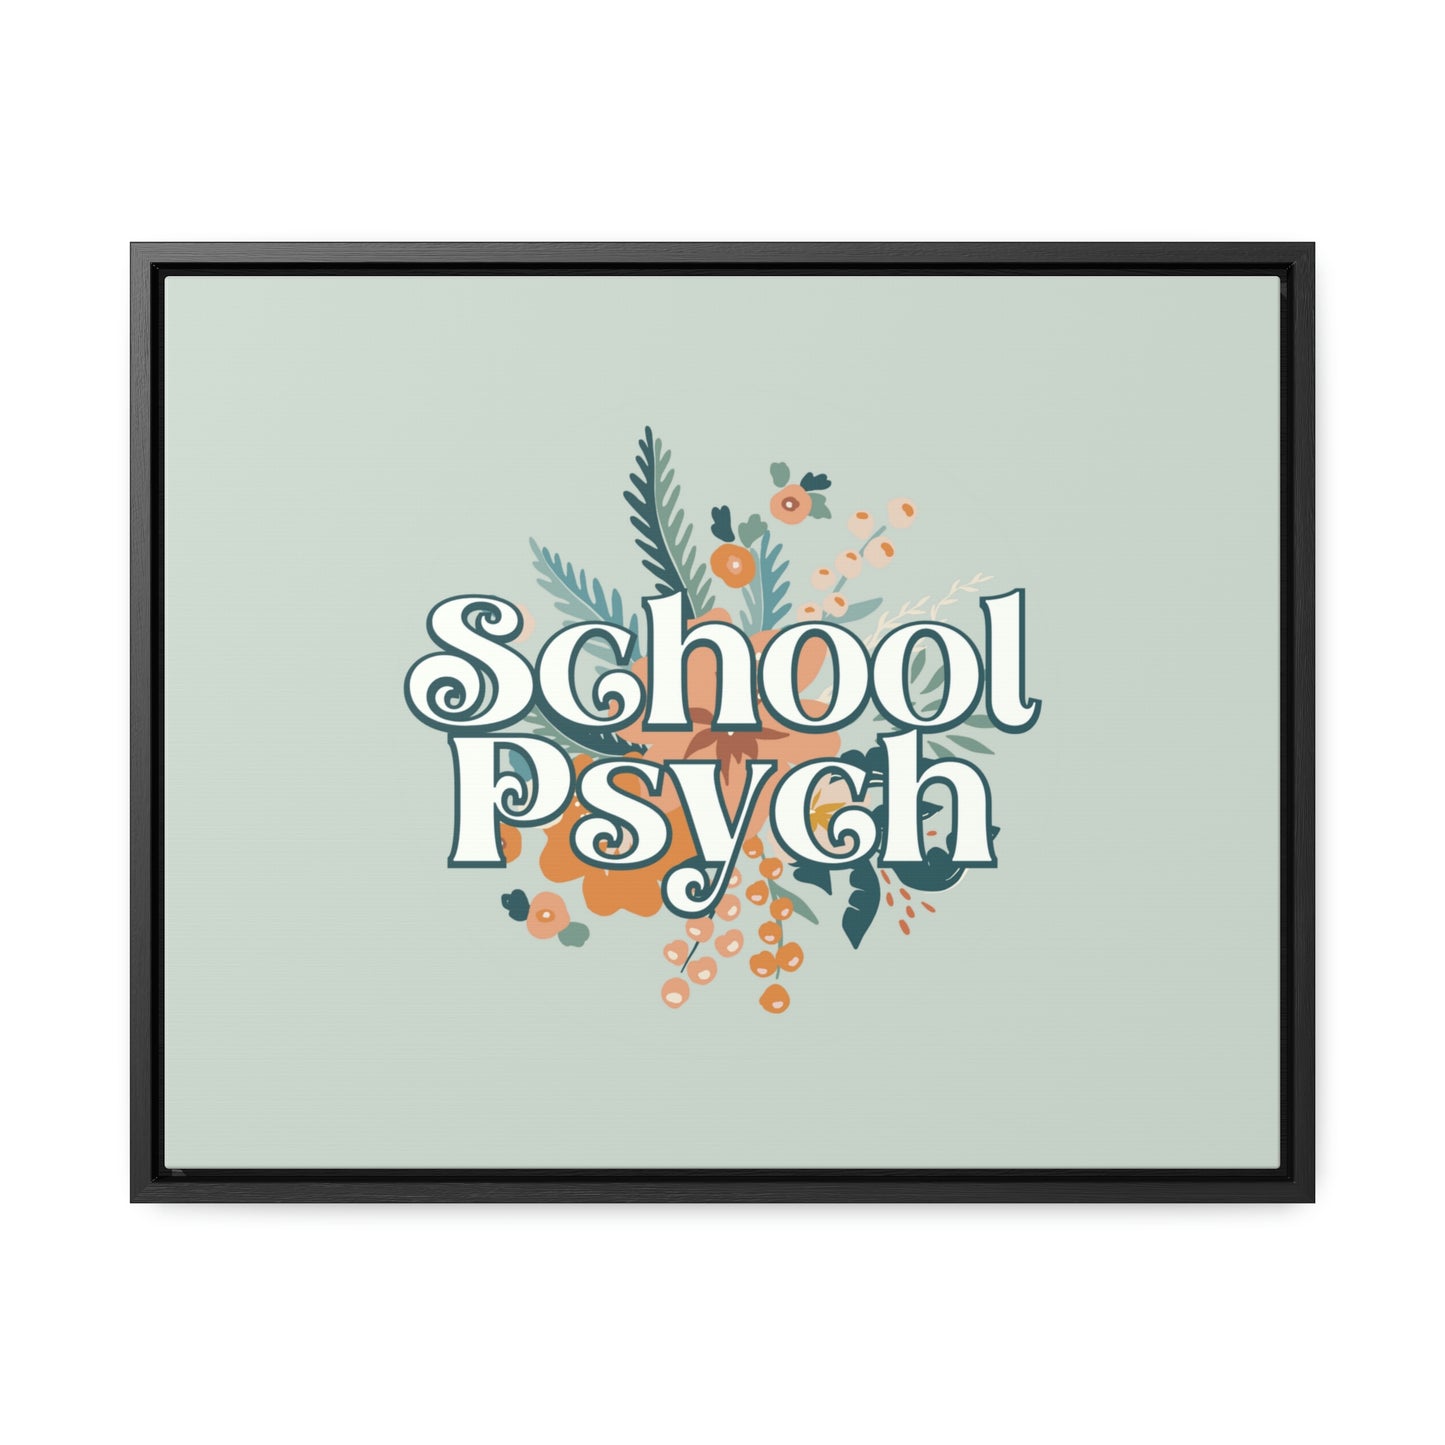 Floral School Psych Framed Canvas (20 x 16 in)